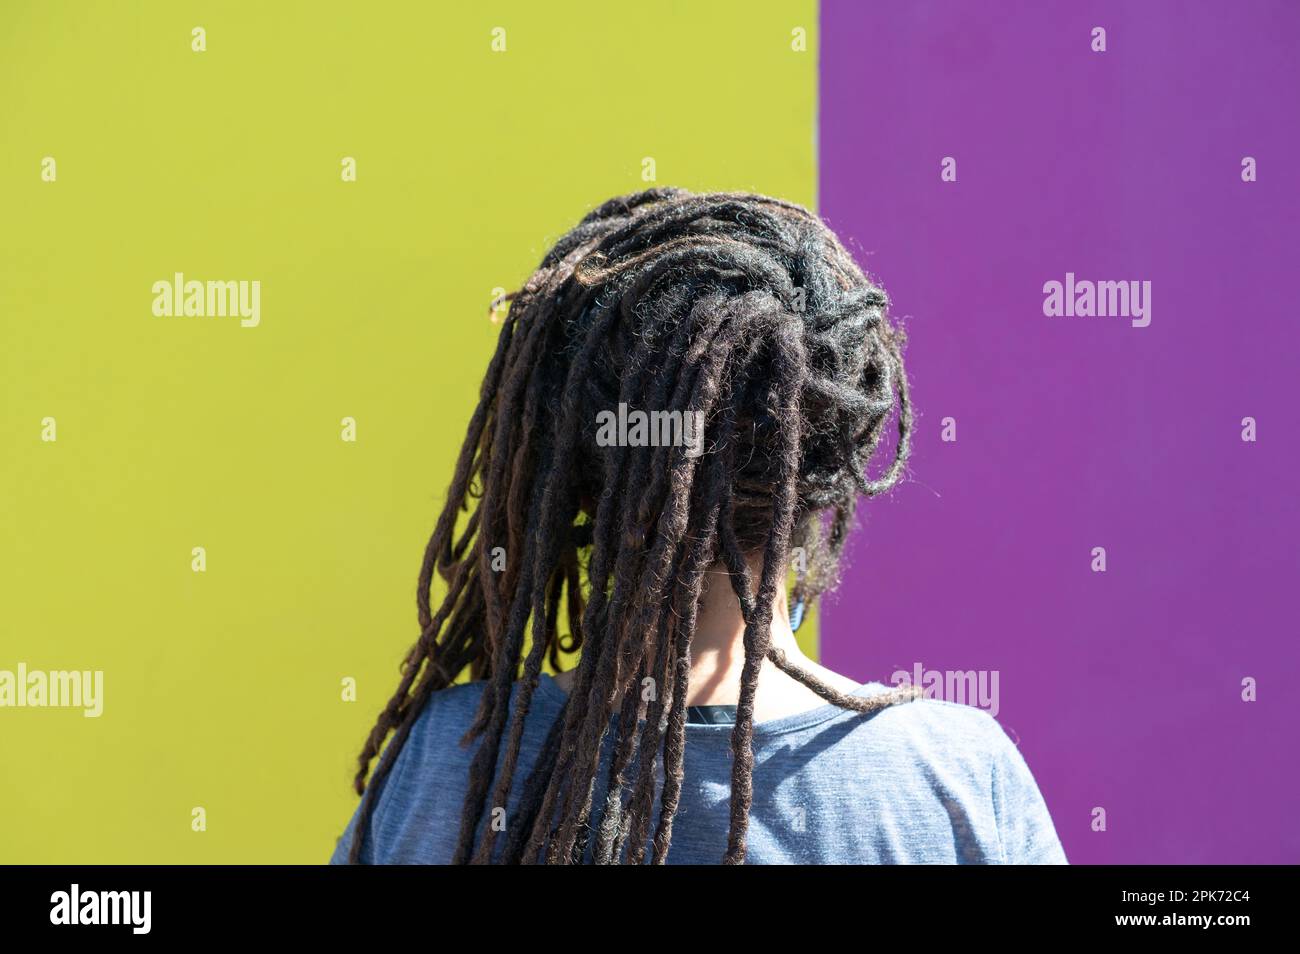 Dramatic portrait of young female with horror black stage makeup painted on  face and orange color dreadlocks hairstyle. Studio shot on blue background  Stock Photo - Alamy